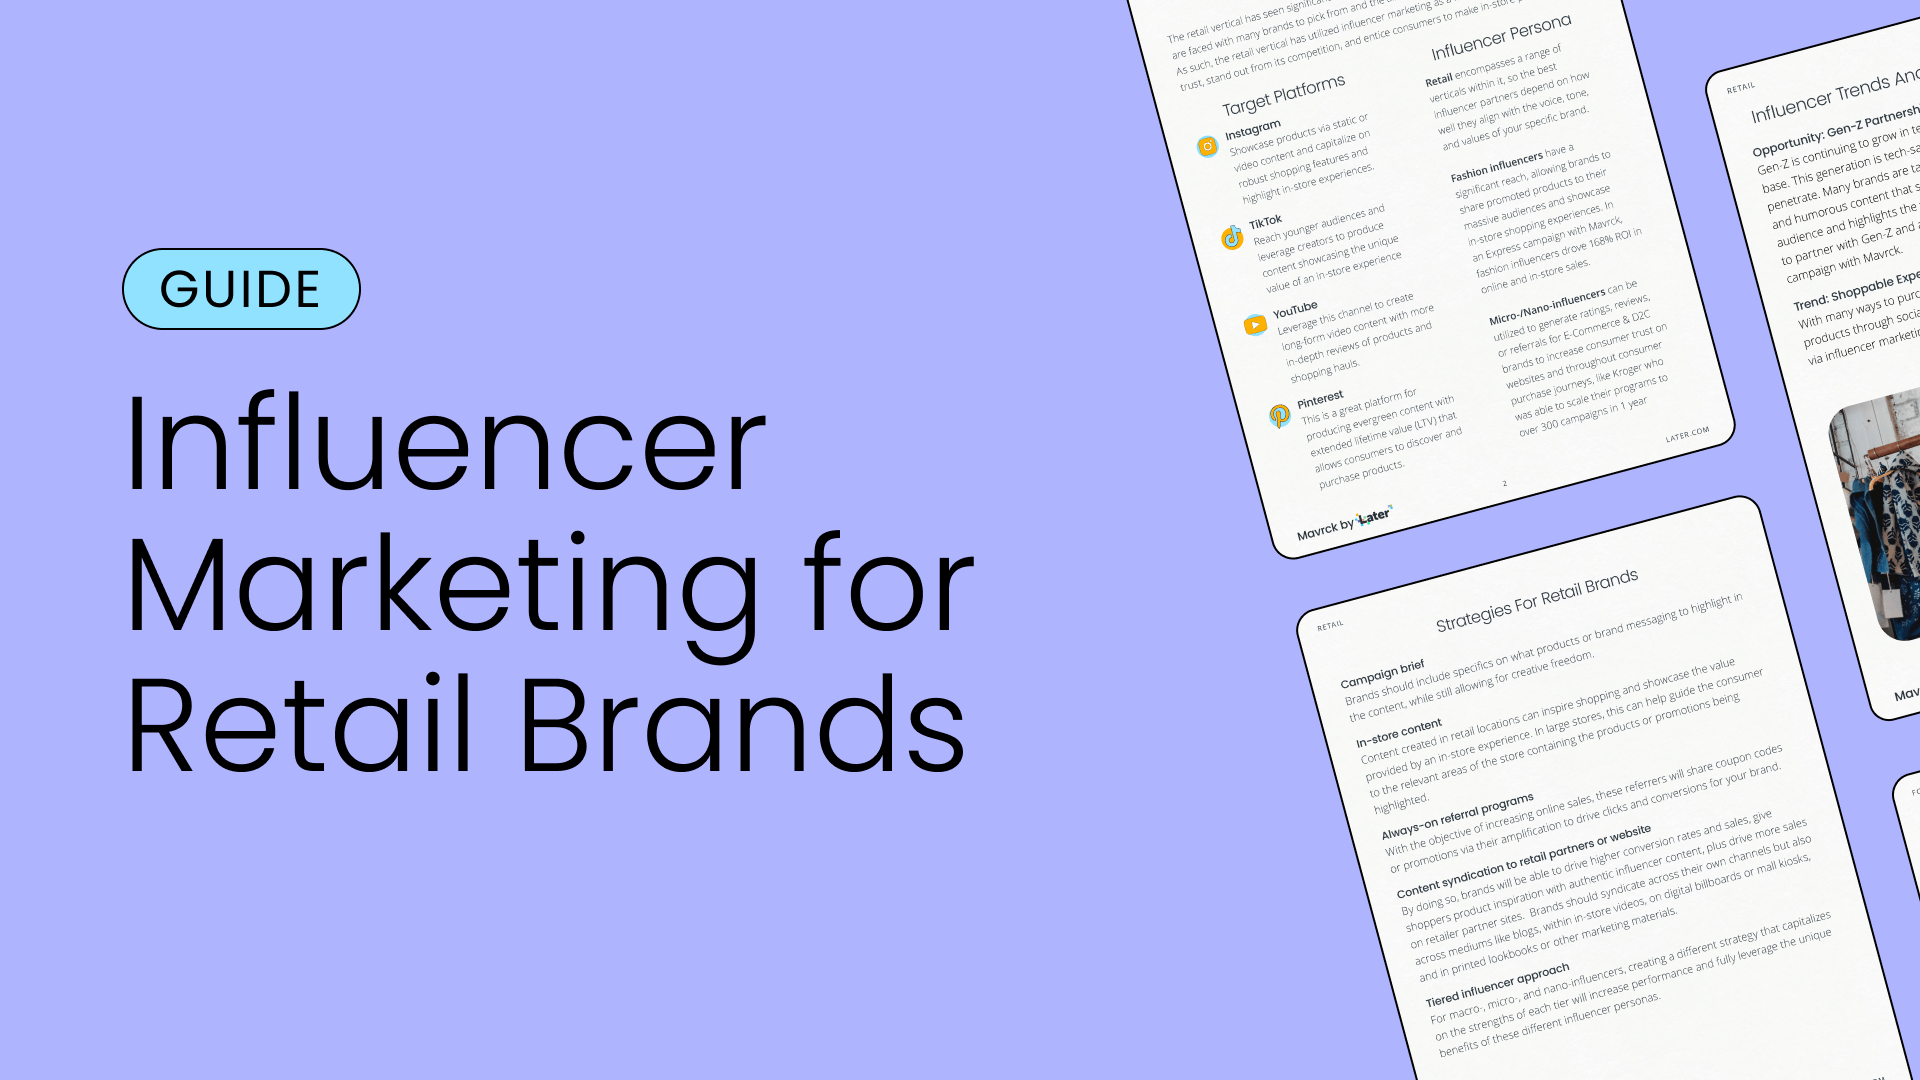 Free influencer marketing guide for retail brands from Later